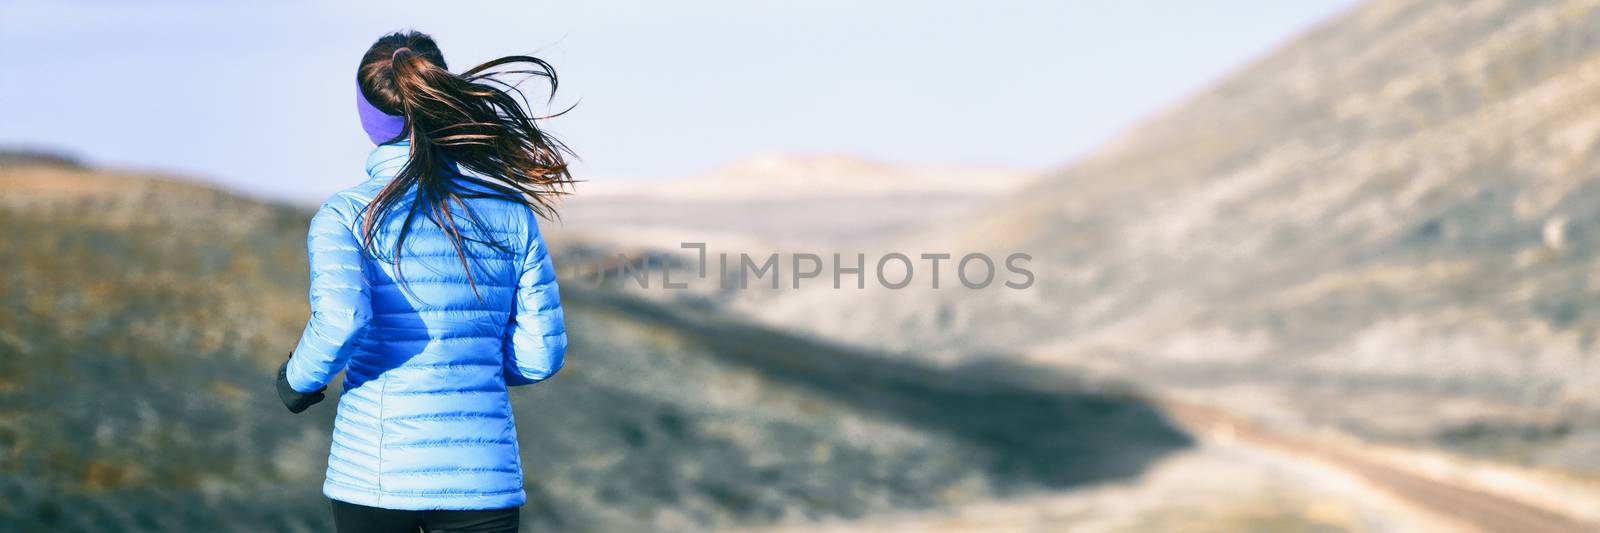 Winter running woman on trail run outdoors in snowy mountains background. Panoramic banner with copy space on white snow. by Maridav